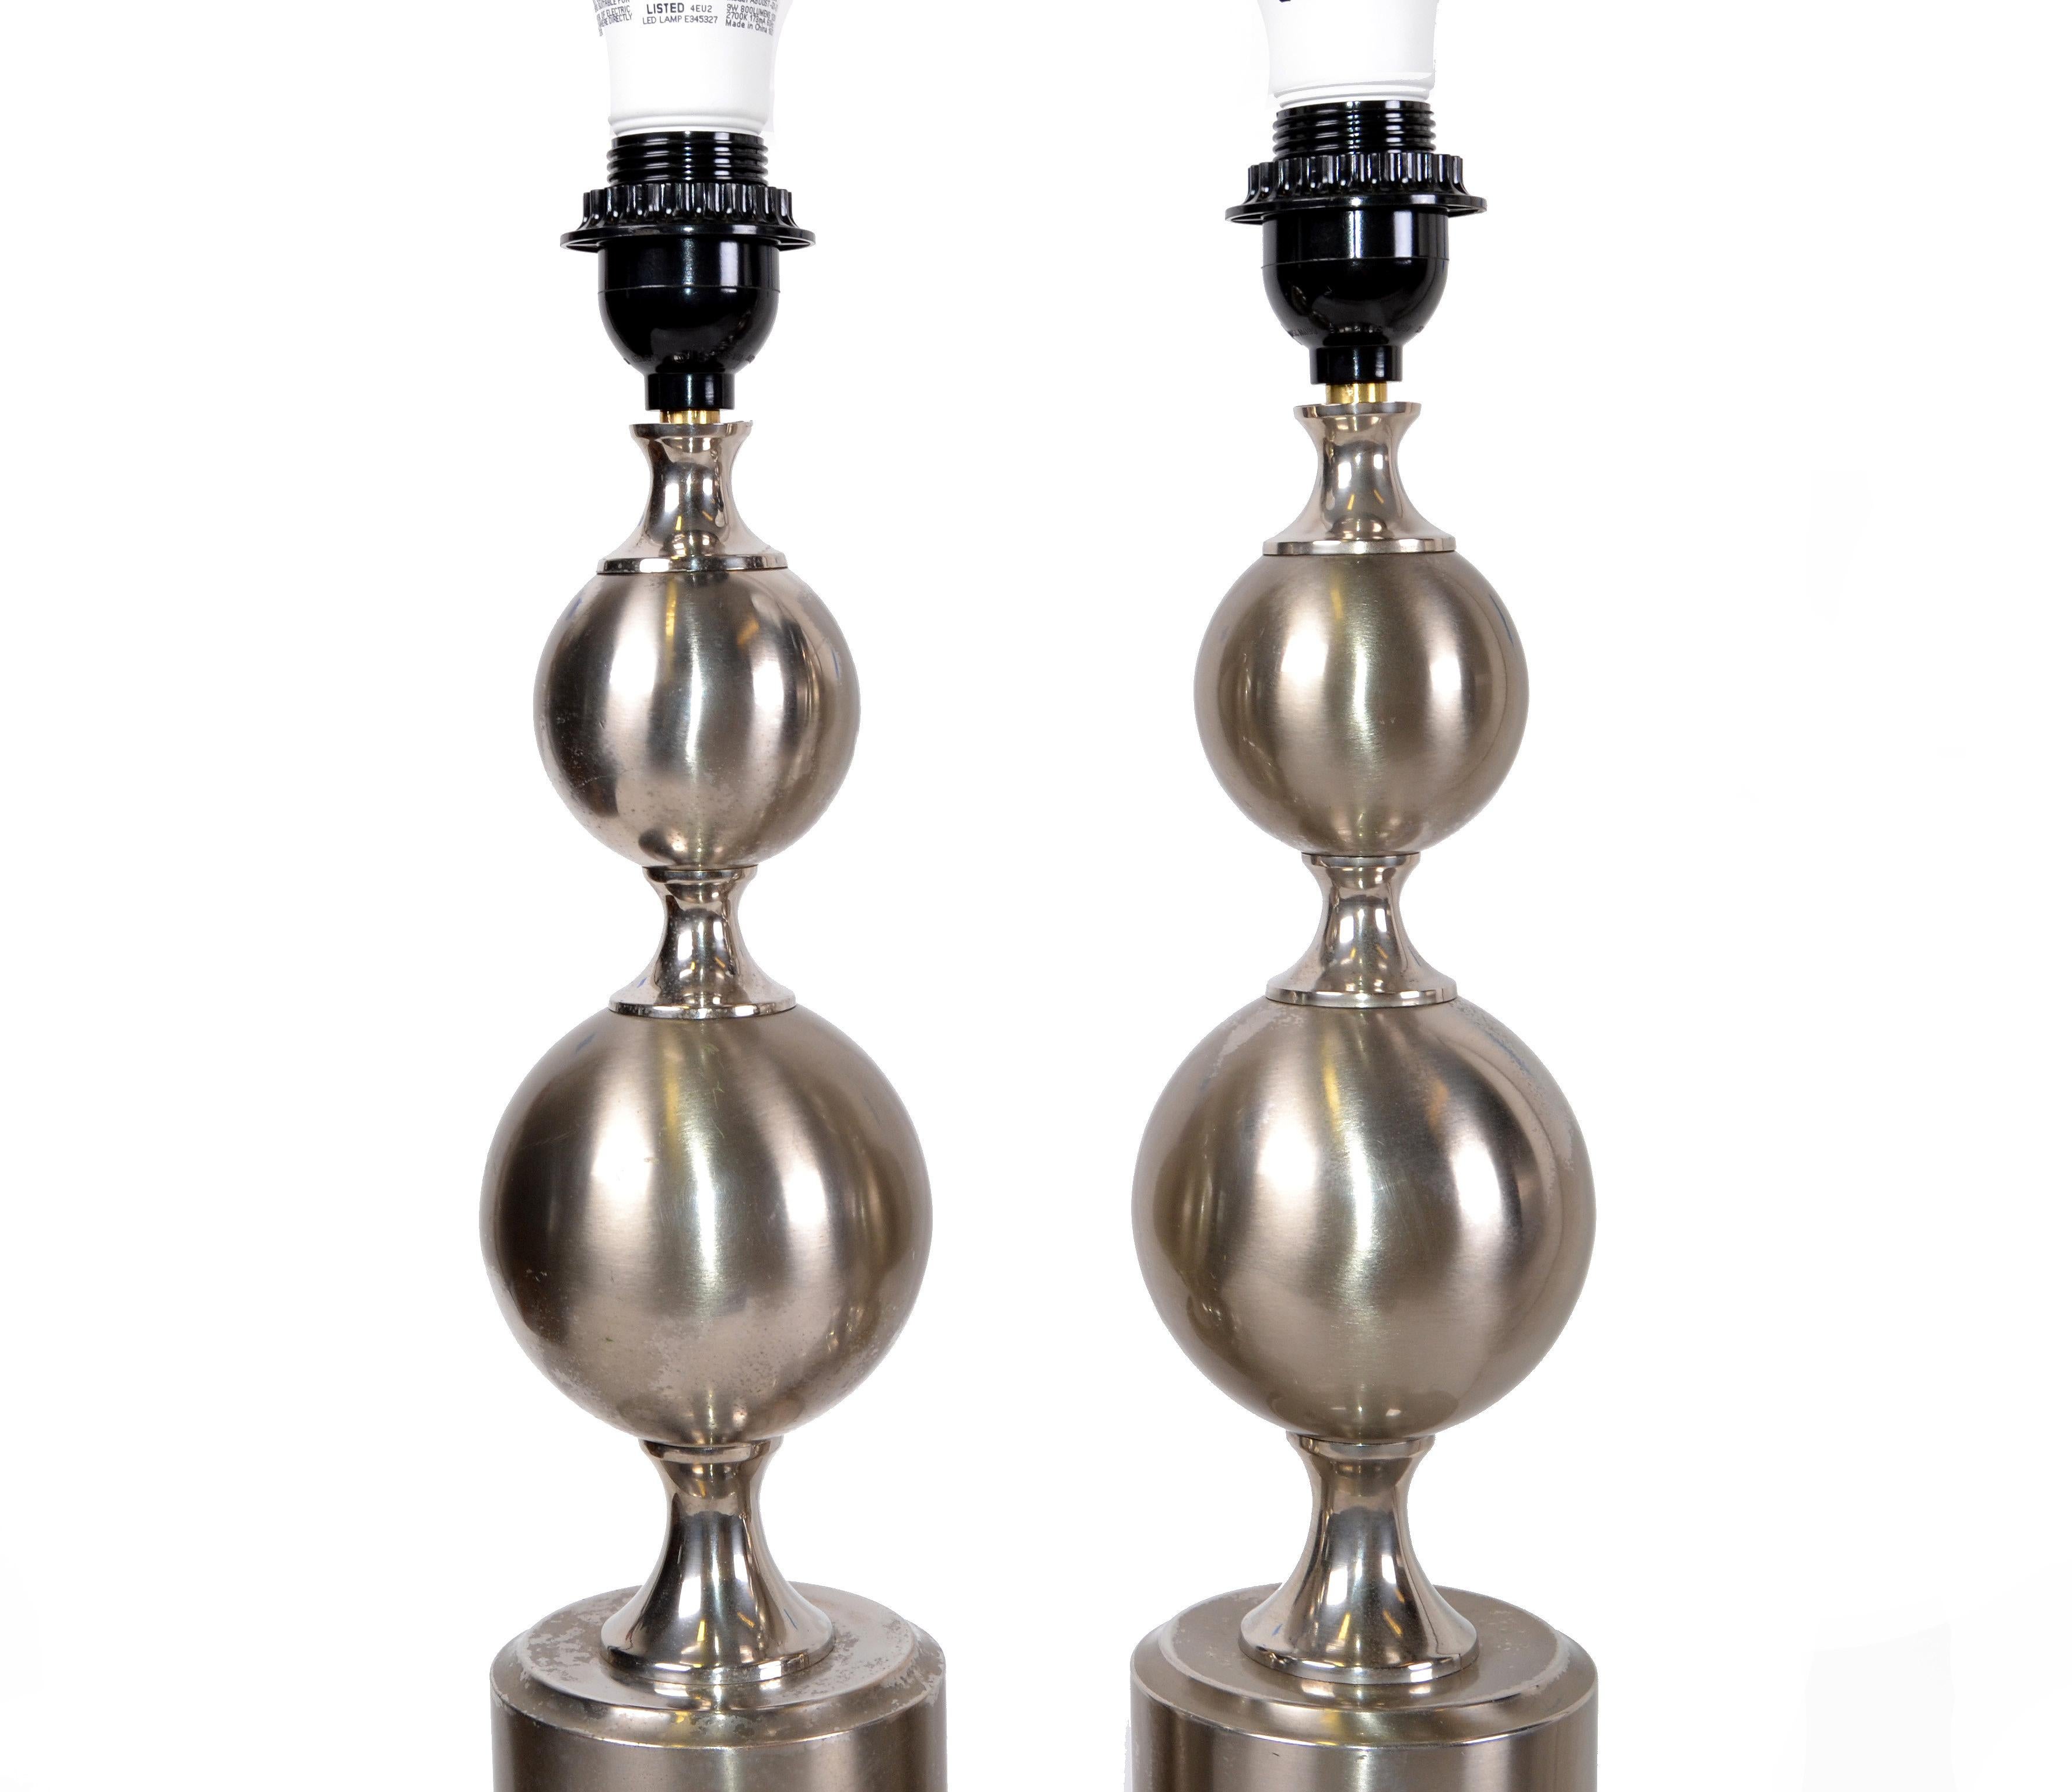 Maison Barbier French Mid-Century Modern Two Spheres Table Lamps, 1970, Pair In Good Condition For Sale In Miami, FL